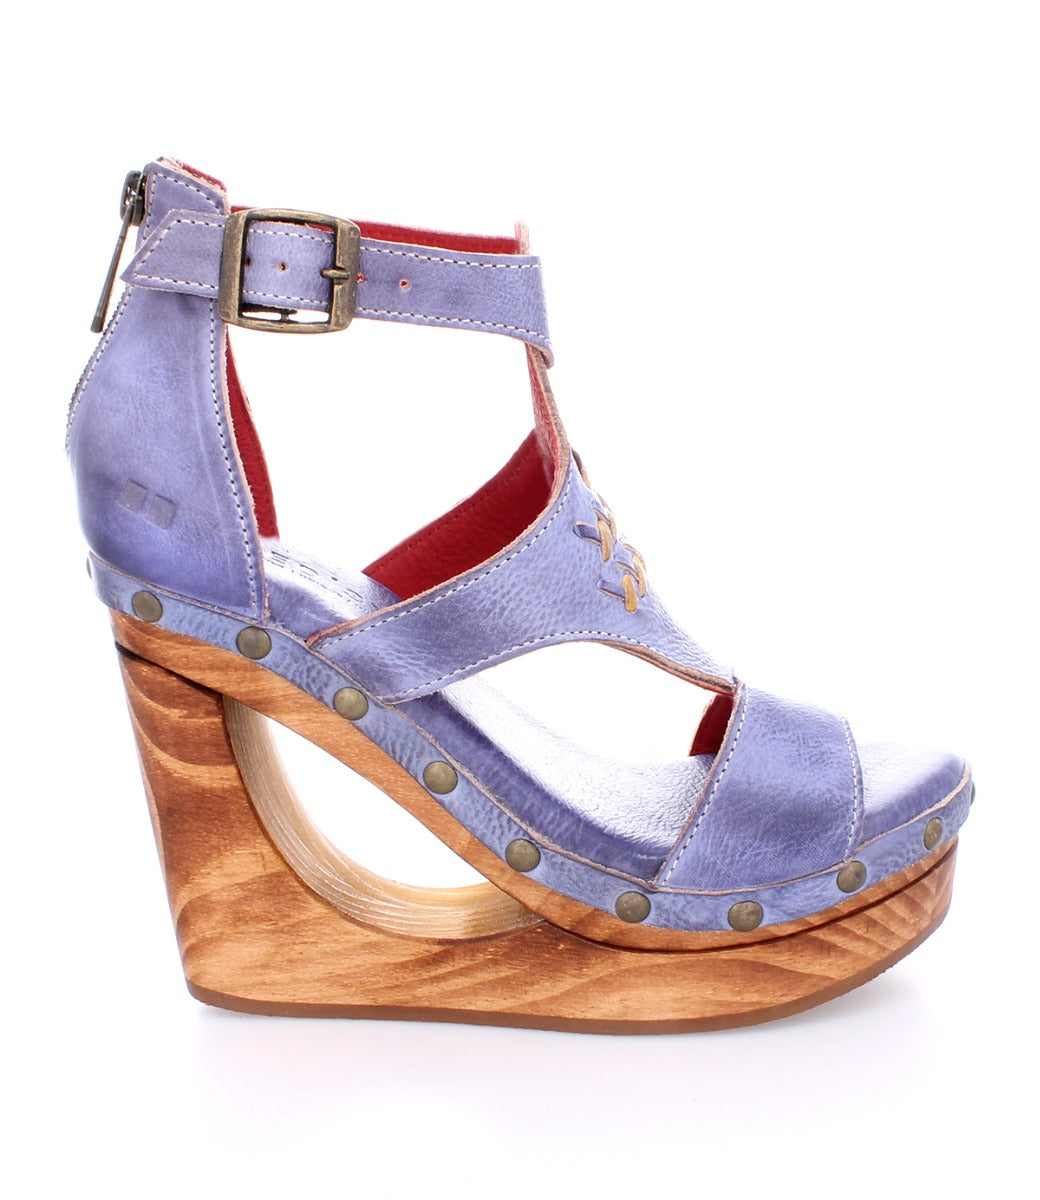 A women's blue wedge sandal with wooden platform called the Millennial by Bed Stu.